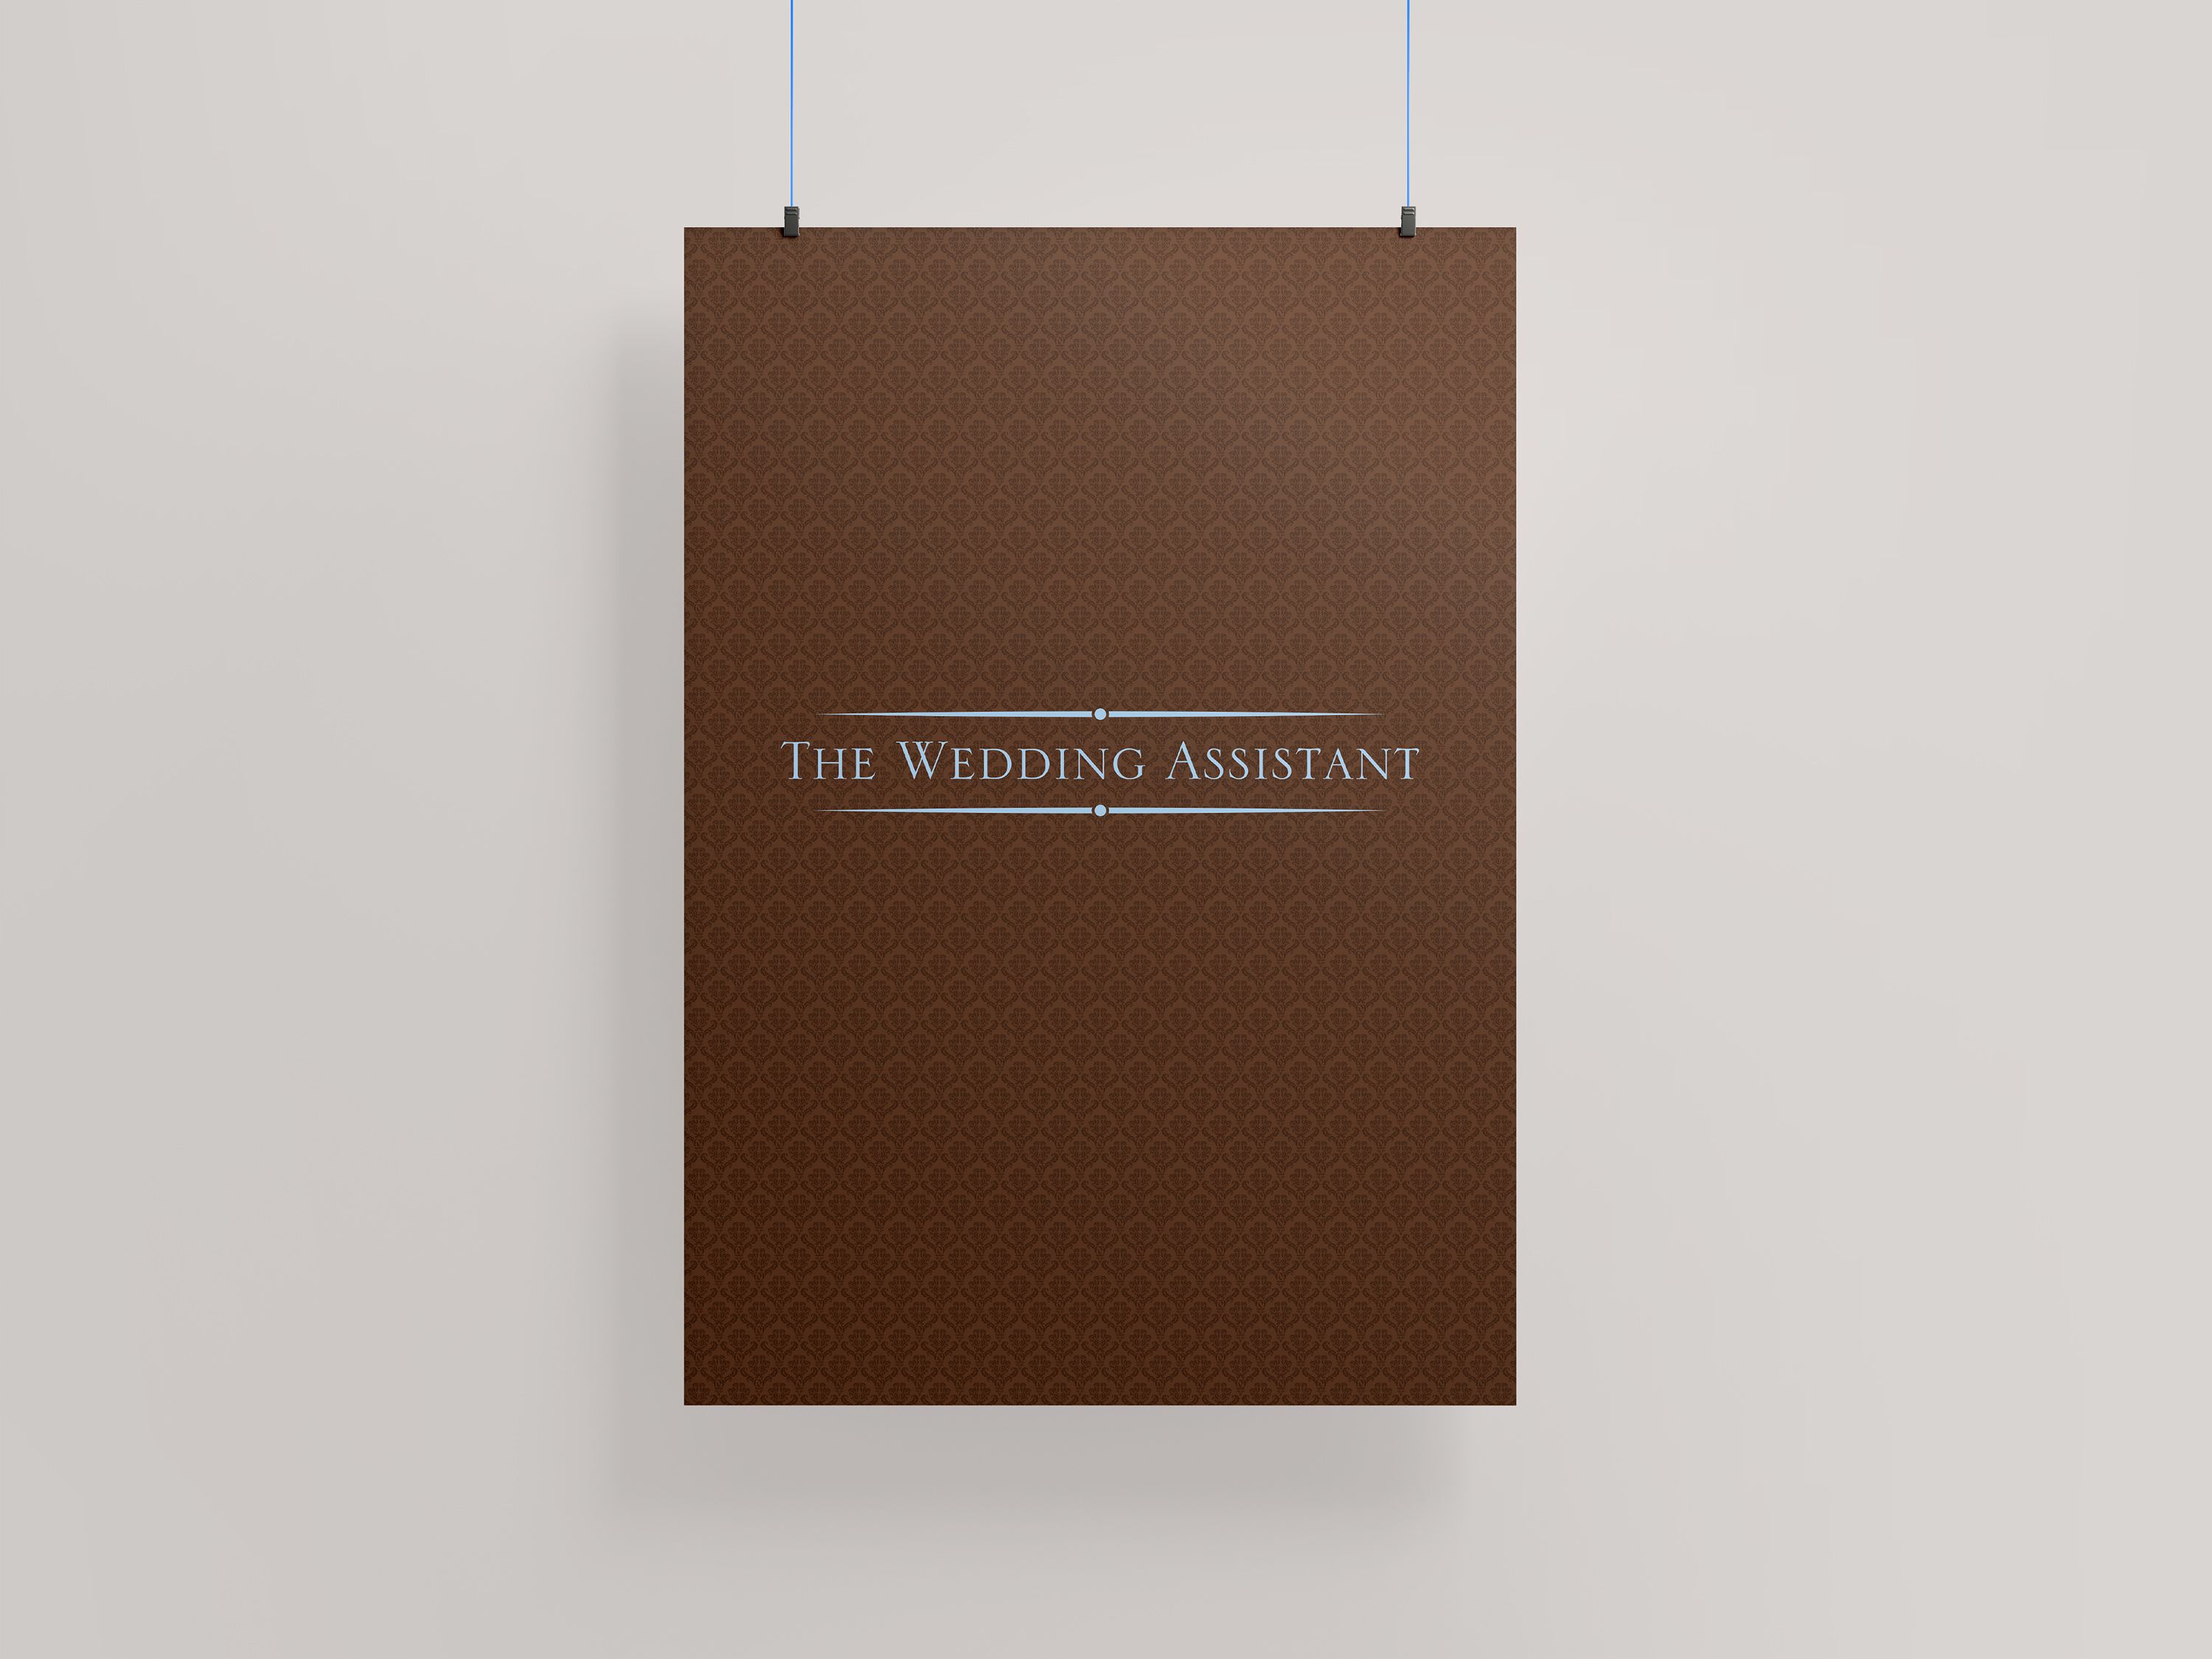 The Wedding Assistant colour logo version on textured background